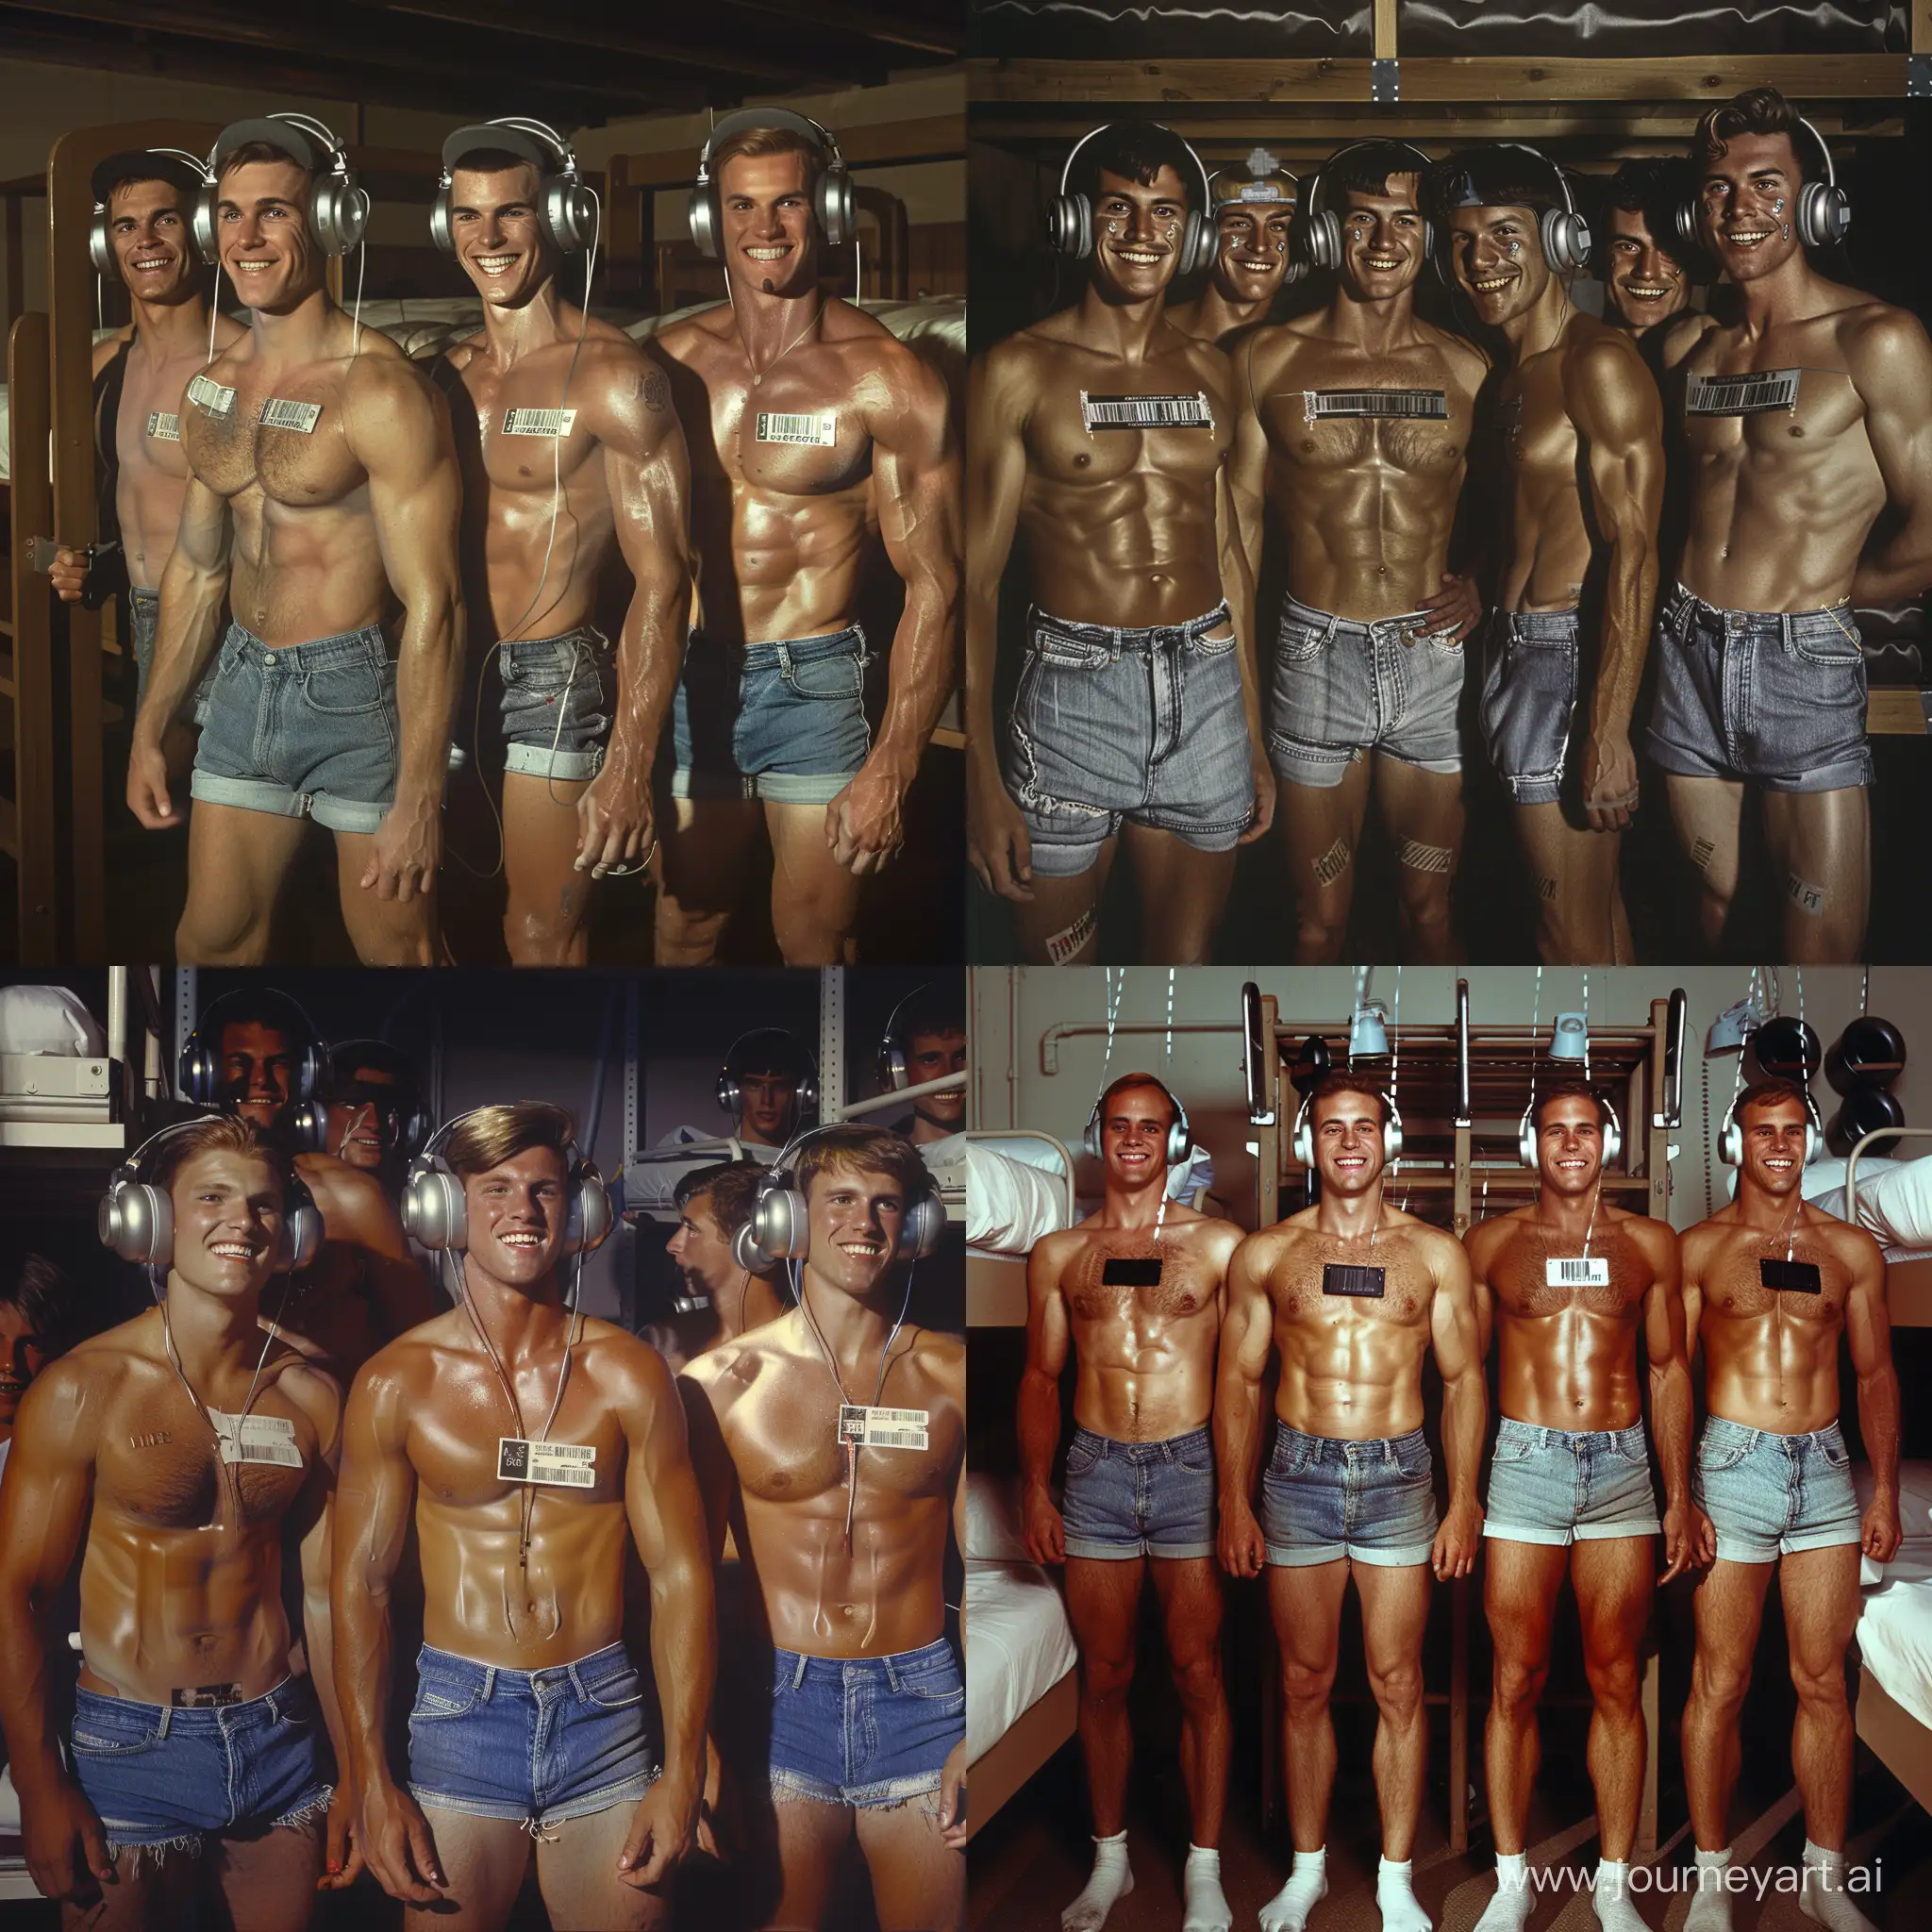 Handsome muscular men of all ages each wear silver headphones and fitted denim cutoff shorts, dazed smiles, small barcode attached to each man's chest, 1980s youth hostel dormitory bunkbed setting, facing the viewer, mass indoctrination, color image, hyperrealistic, cinematic